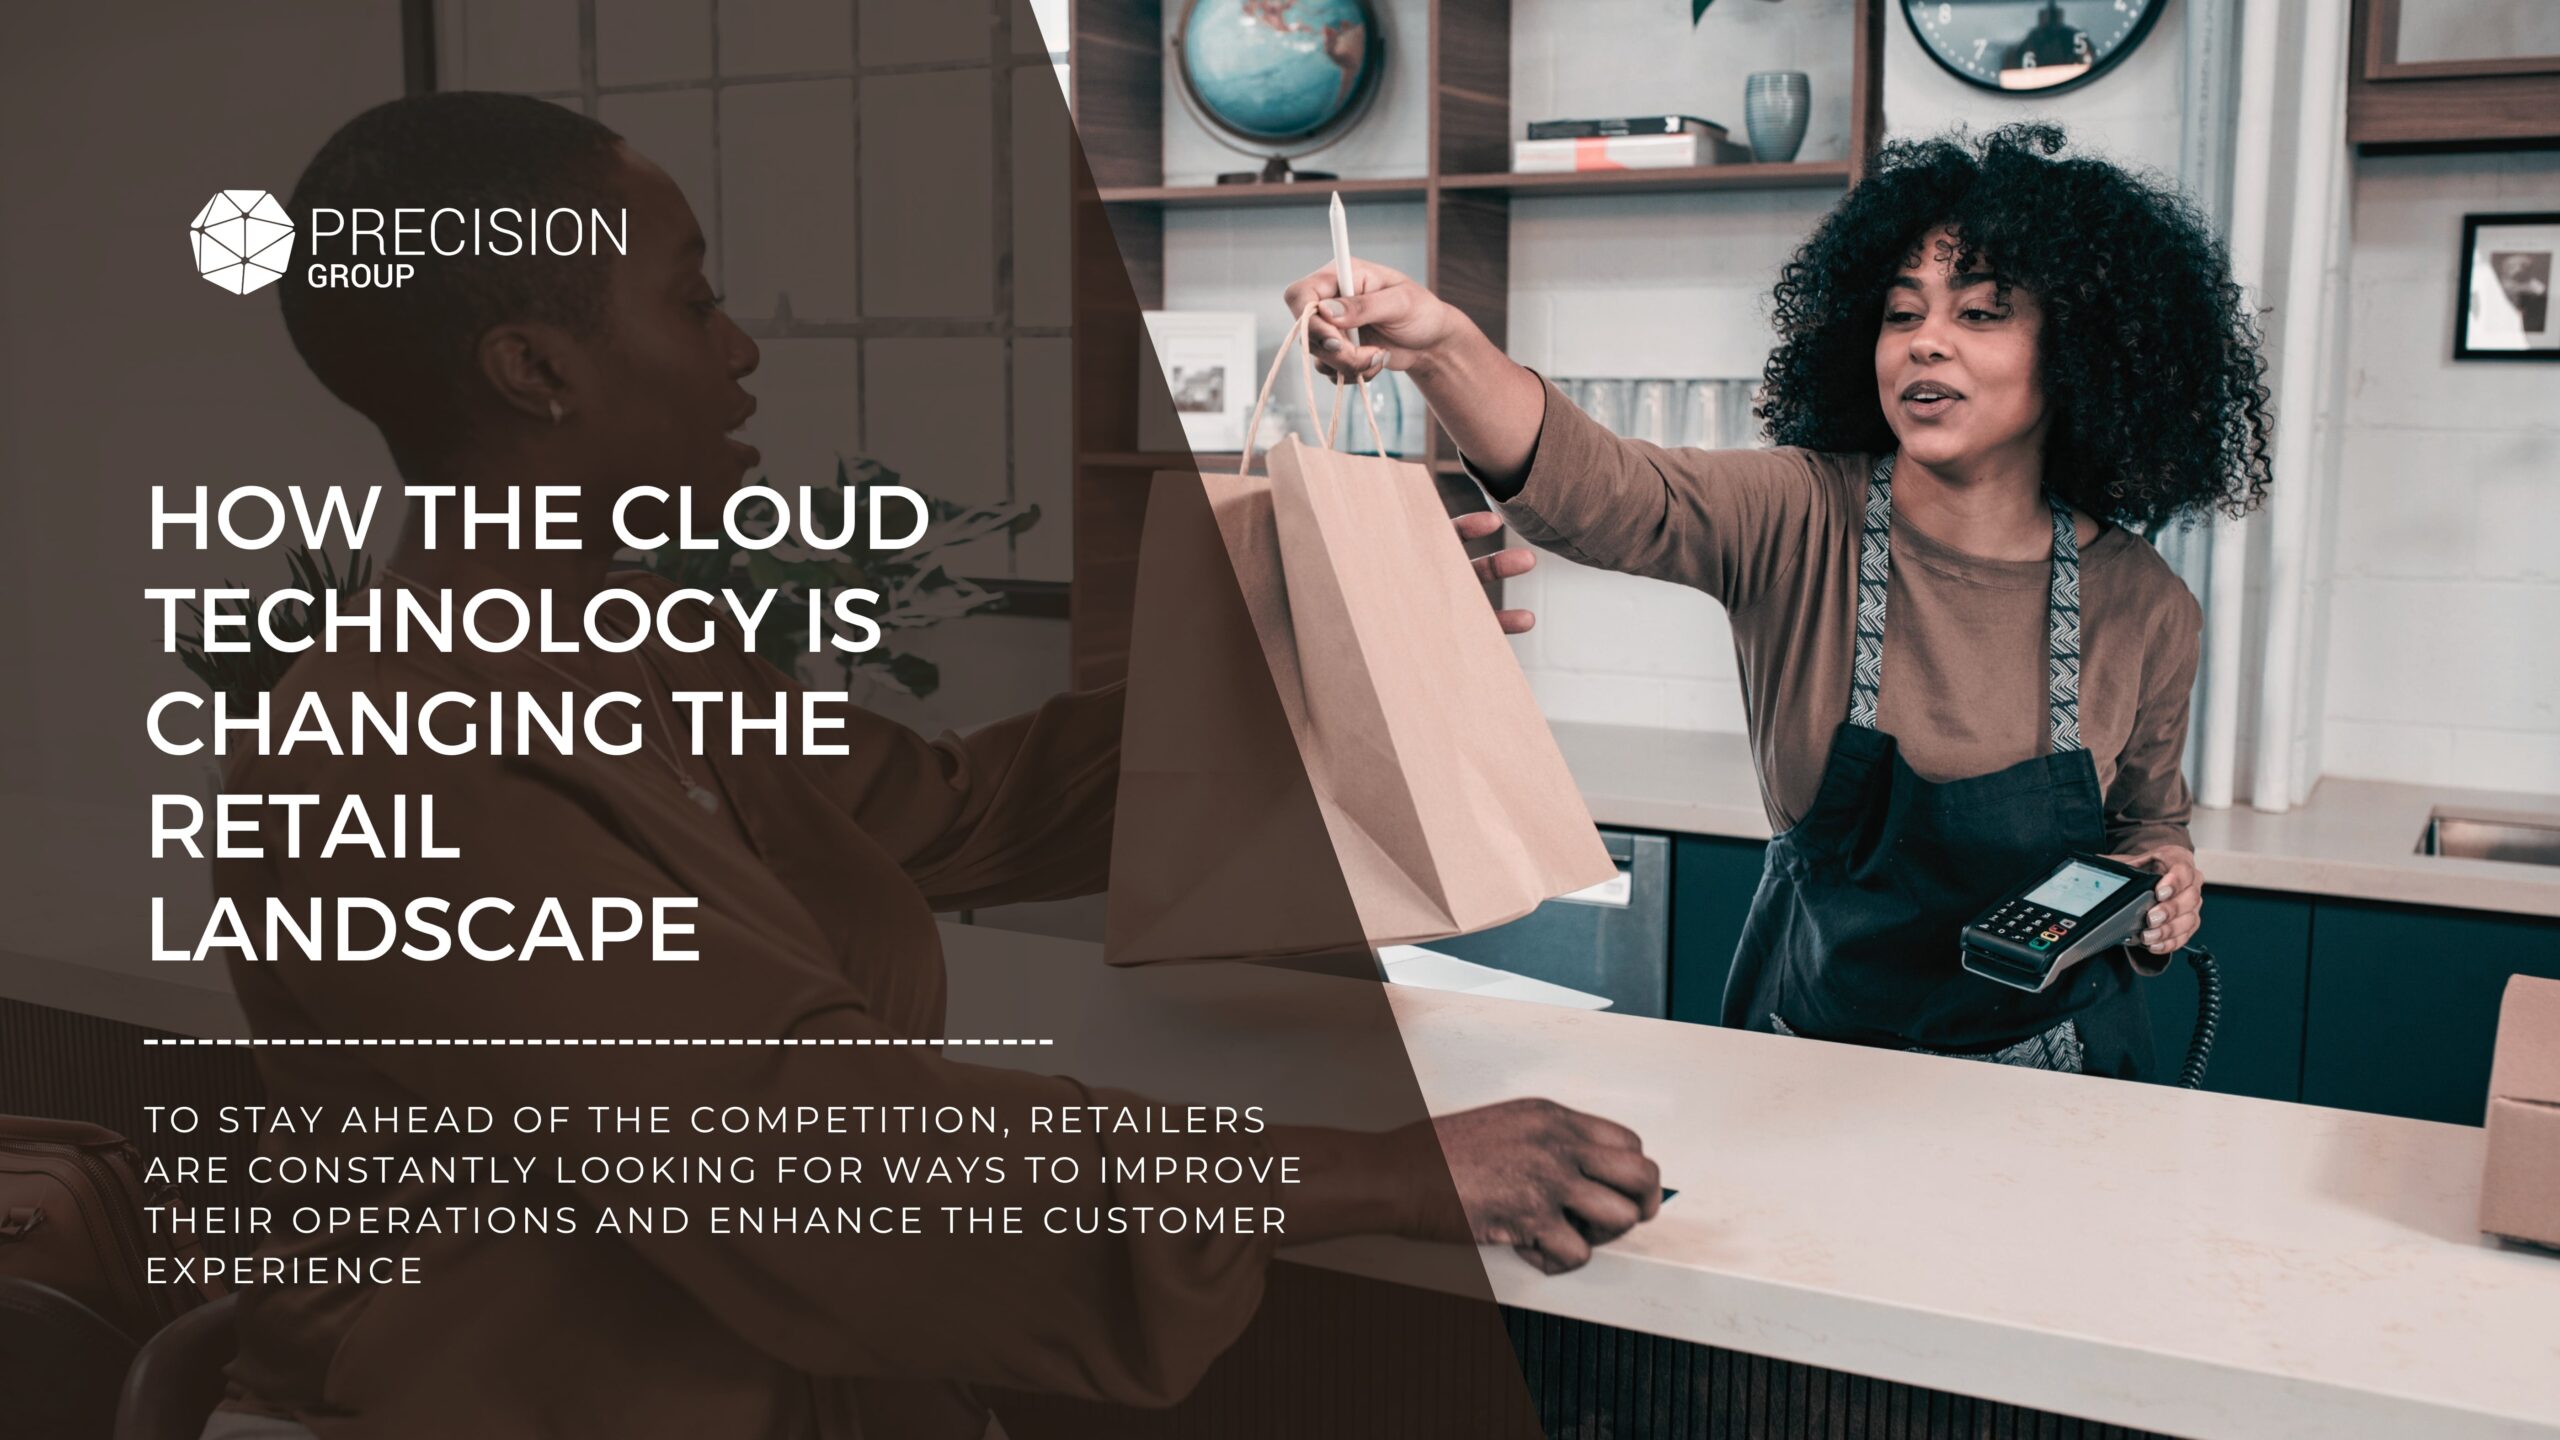 HOW THE CLOUD TECHNOLOGY IS CHANGING THE RETAIL LANDSCAPE